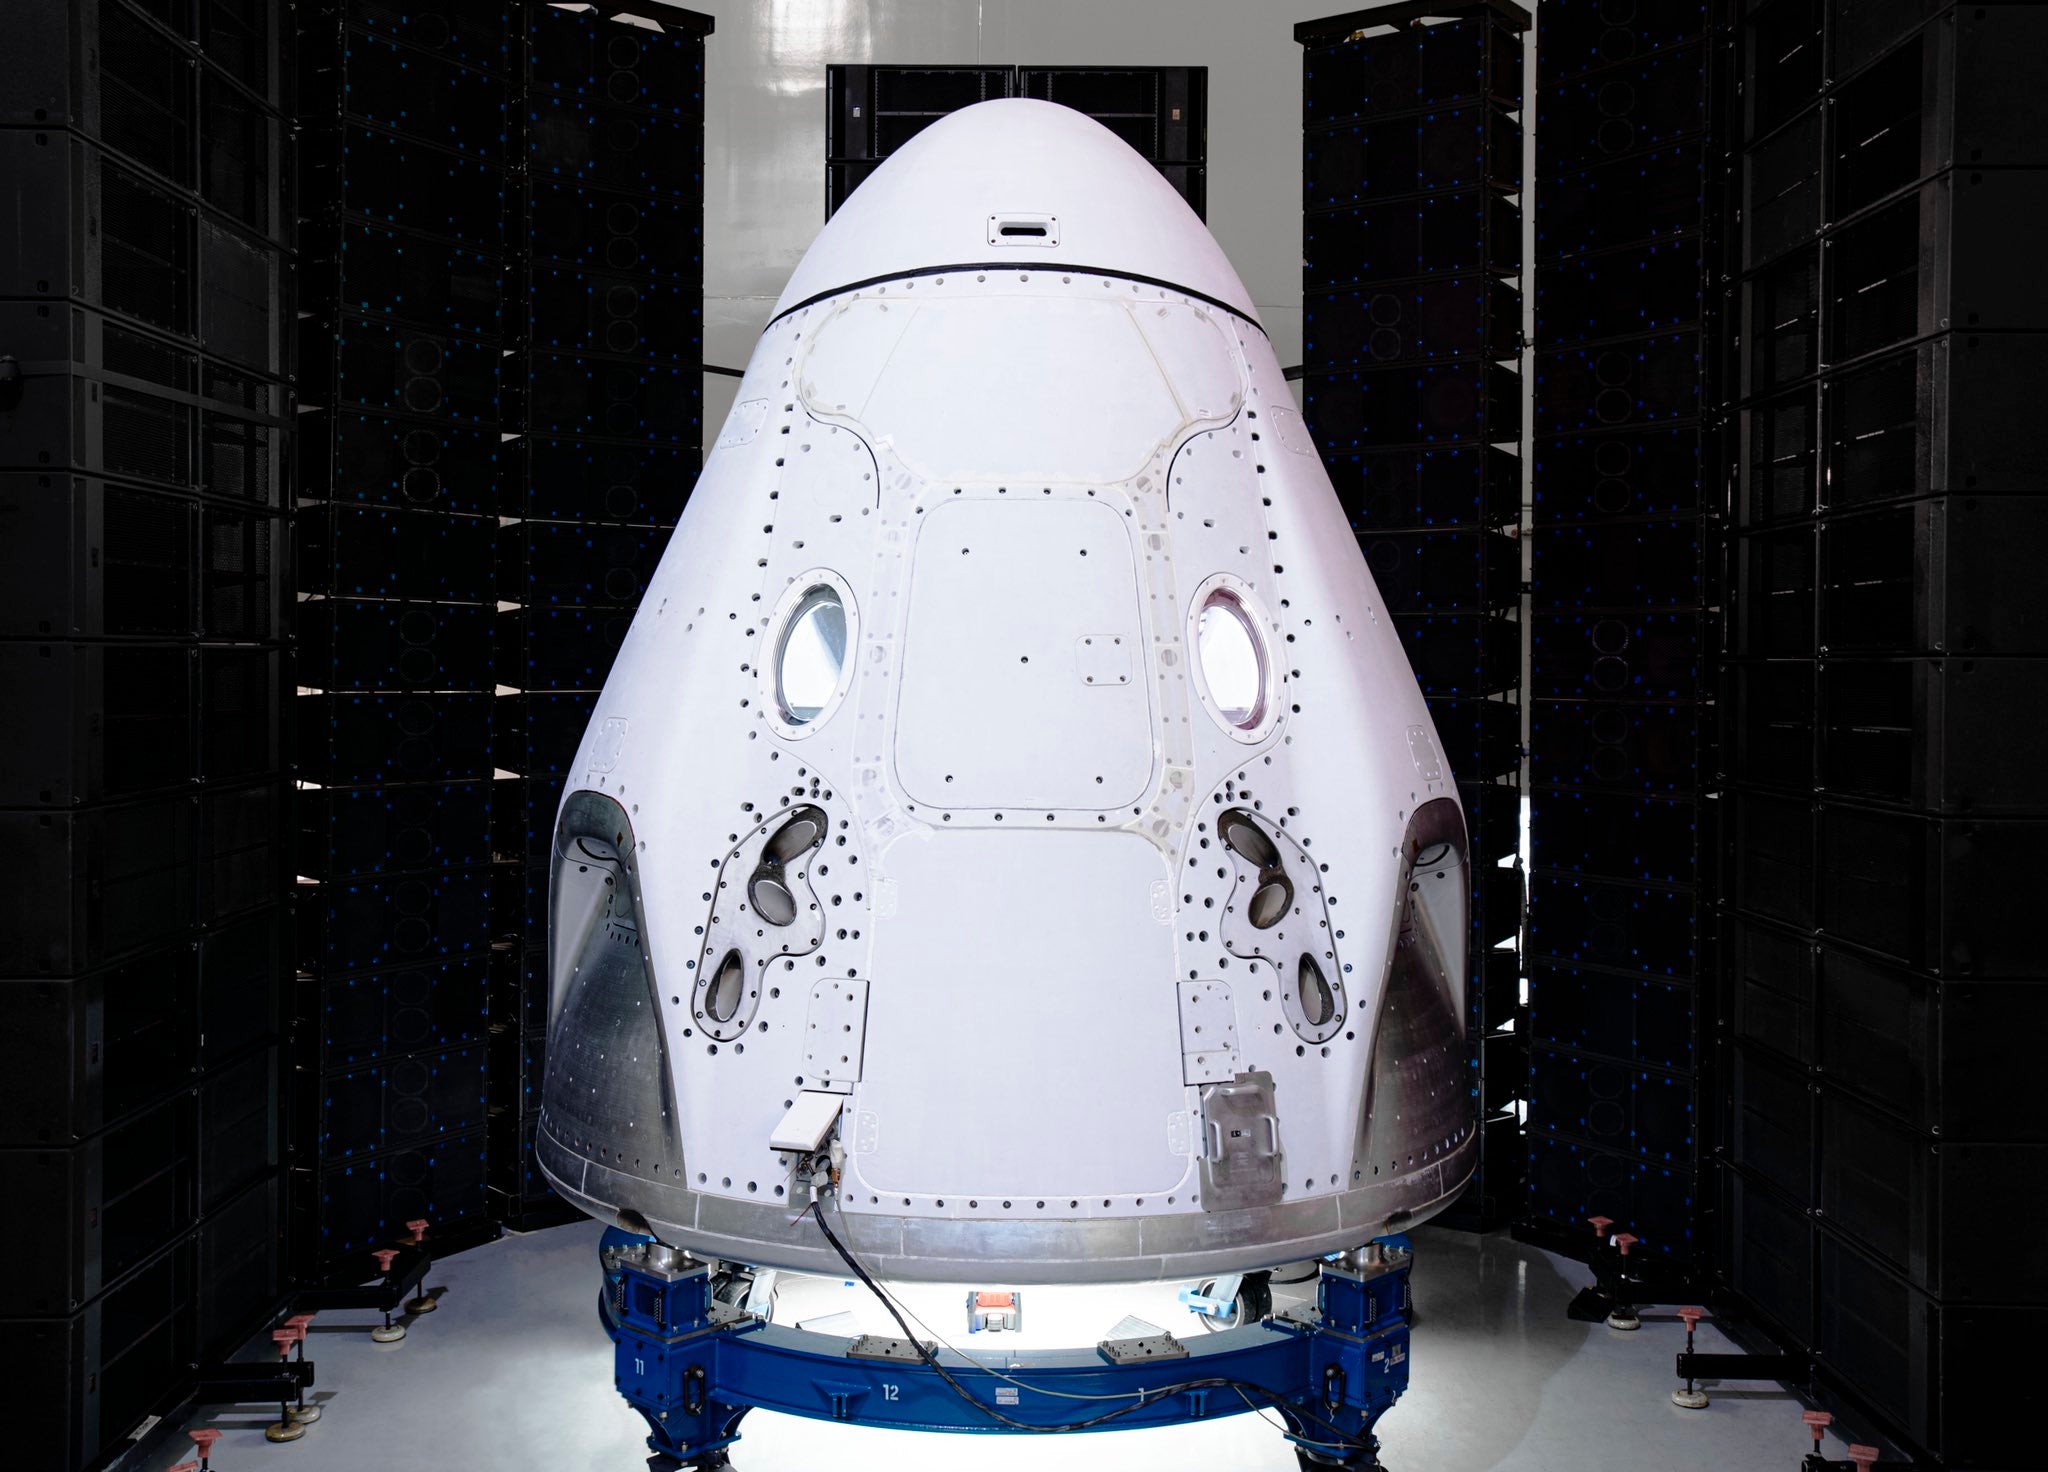 SpaceX's Crew Dragon spacecraft completes acoustic testing -another step closer towards launching NASA Astronauts for the first time!